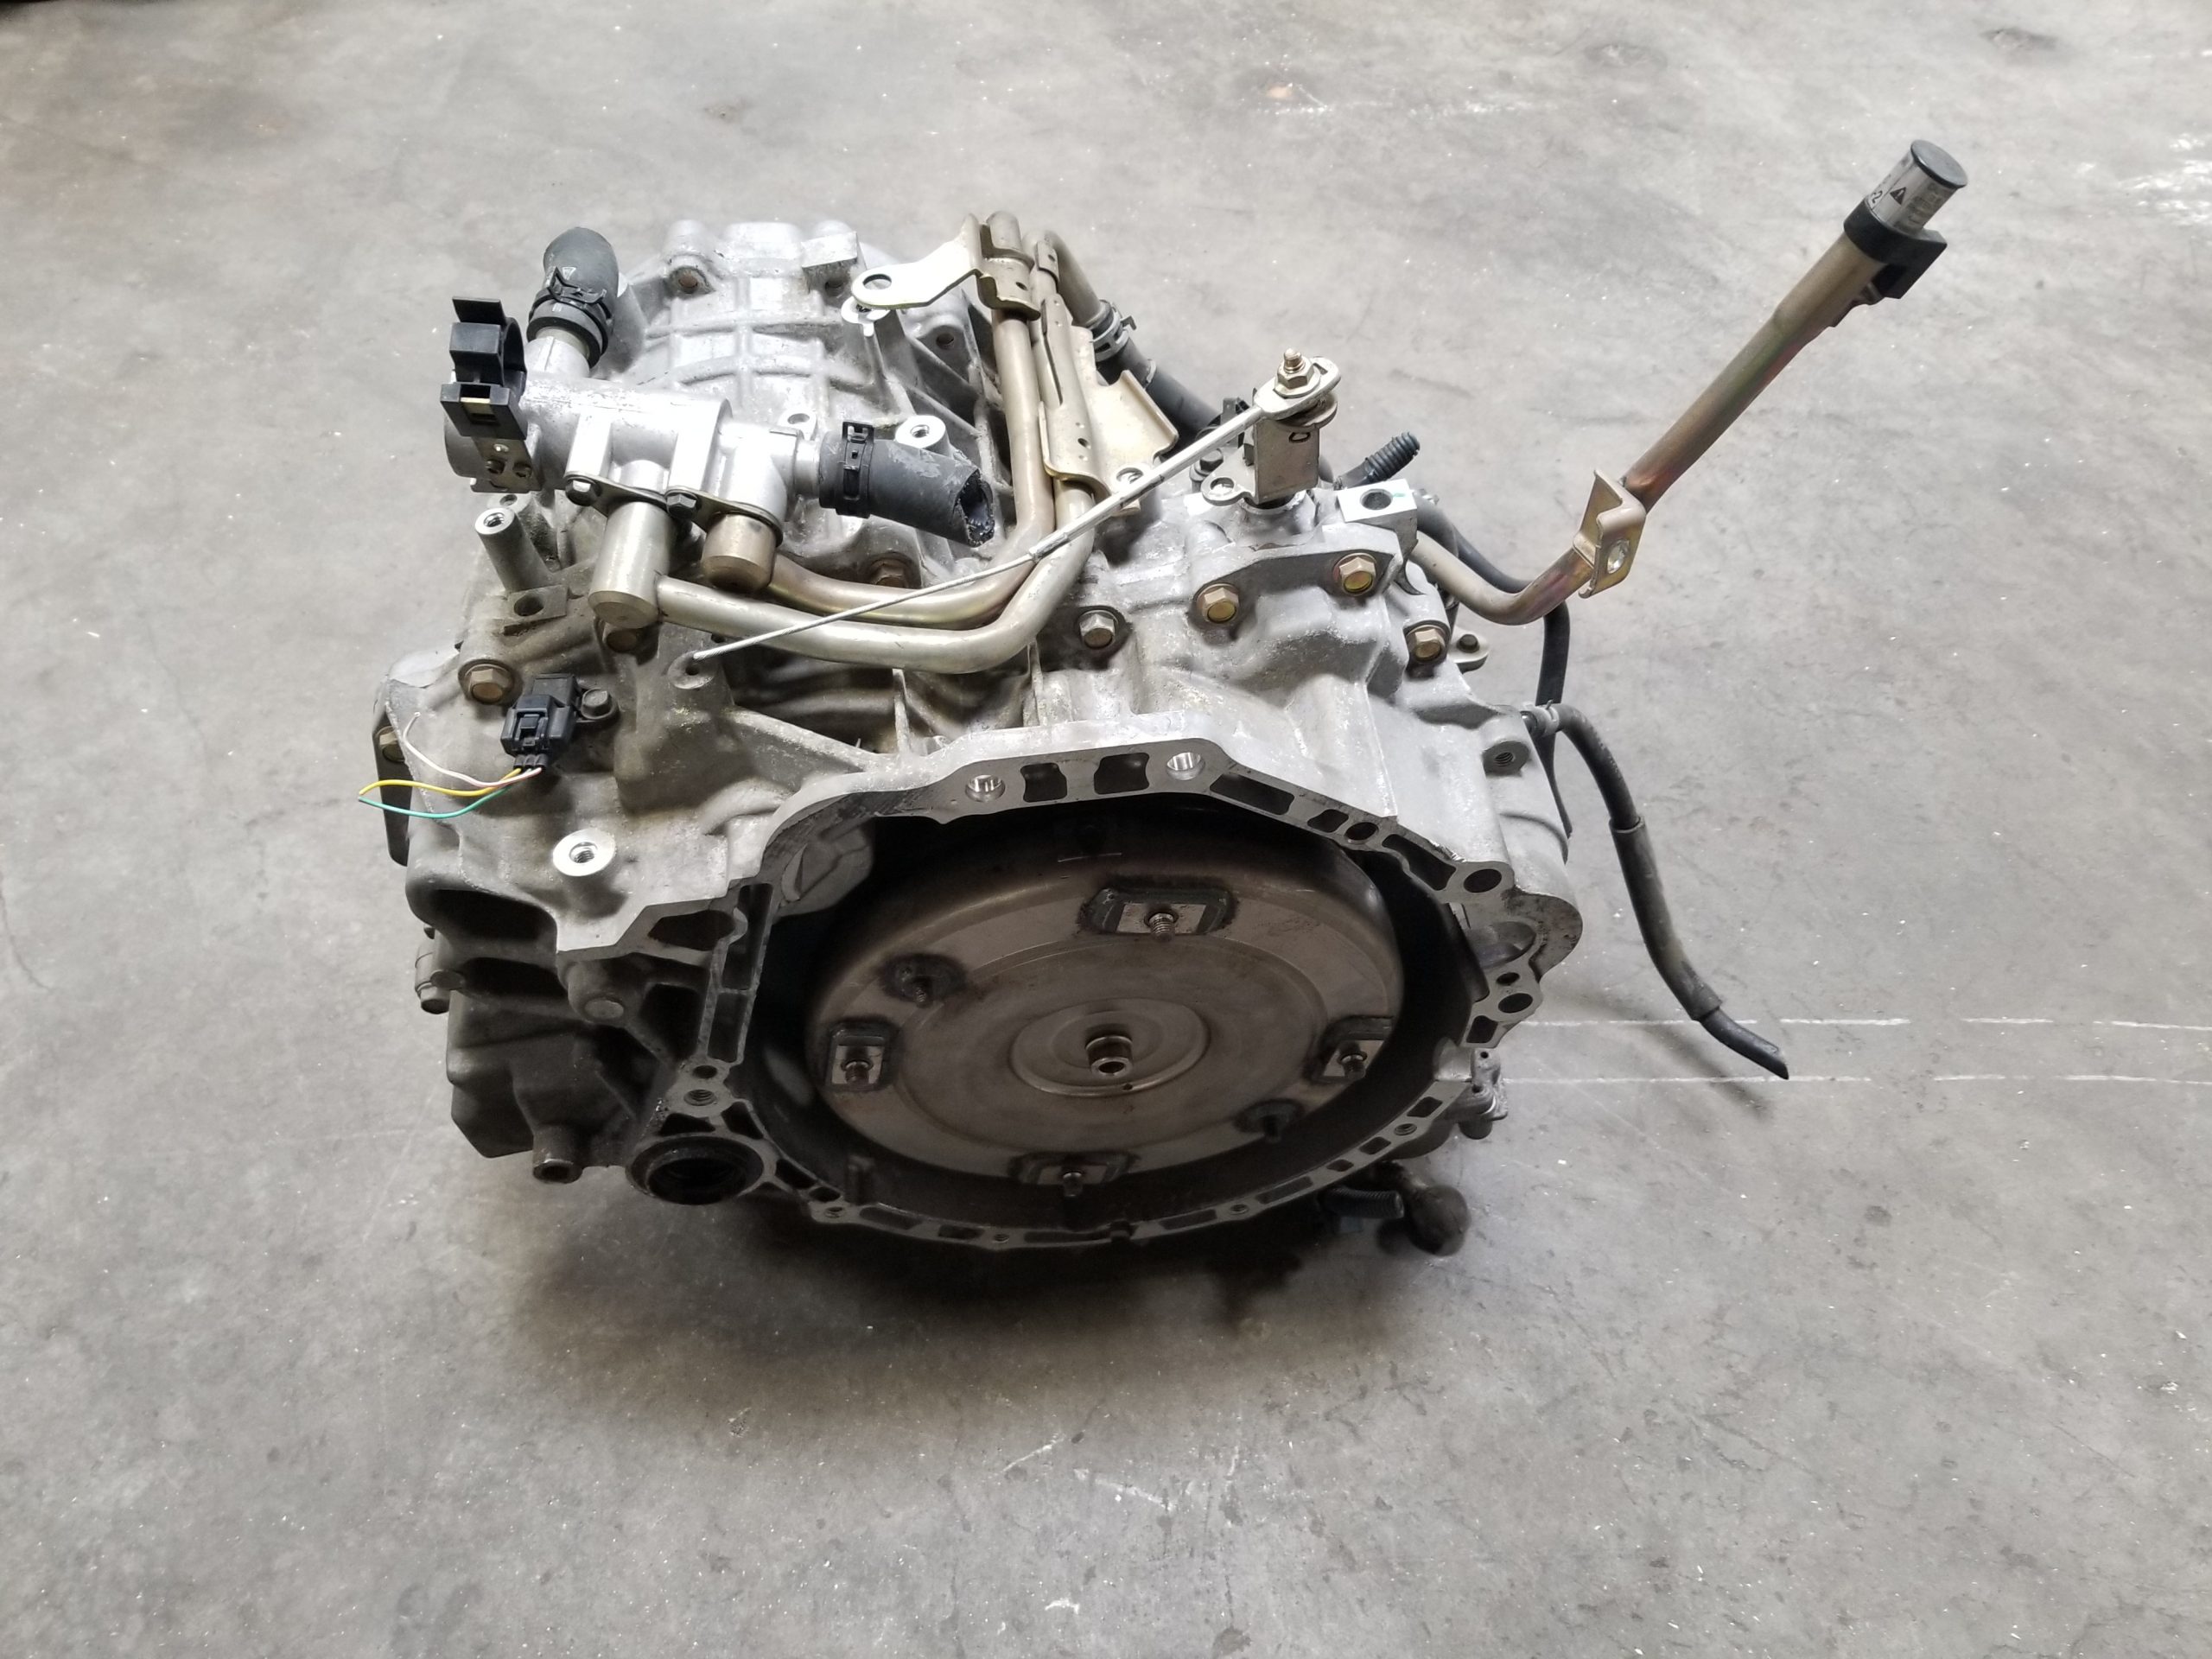 2002 nissan altima transmission replacement cost